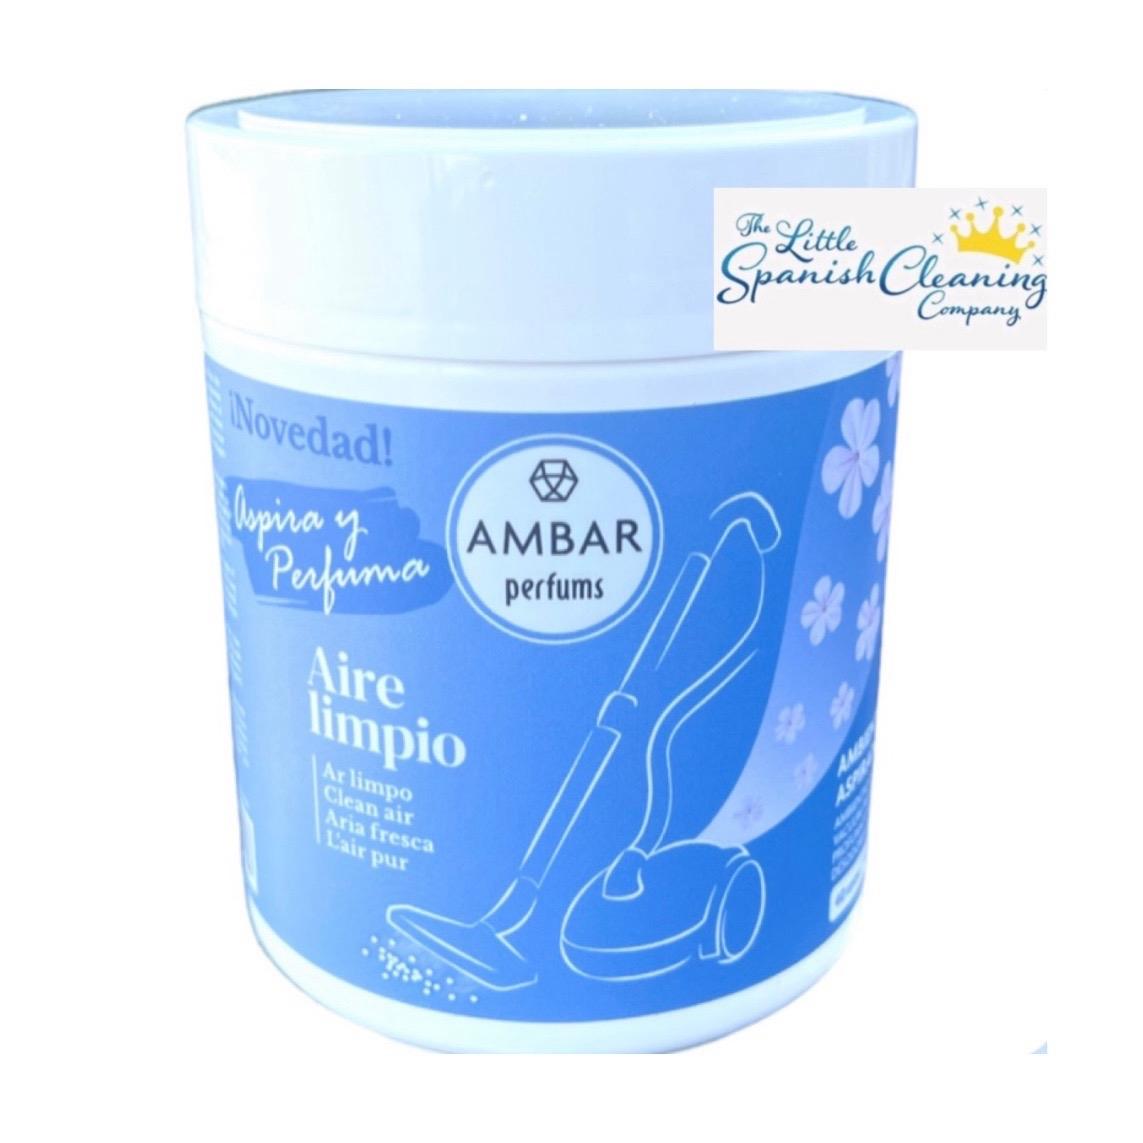 Hoover Chips Ambar Vacuum Perfume - Aire Limpio 400ml Spanish cleaning